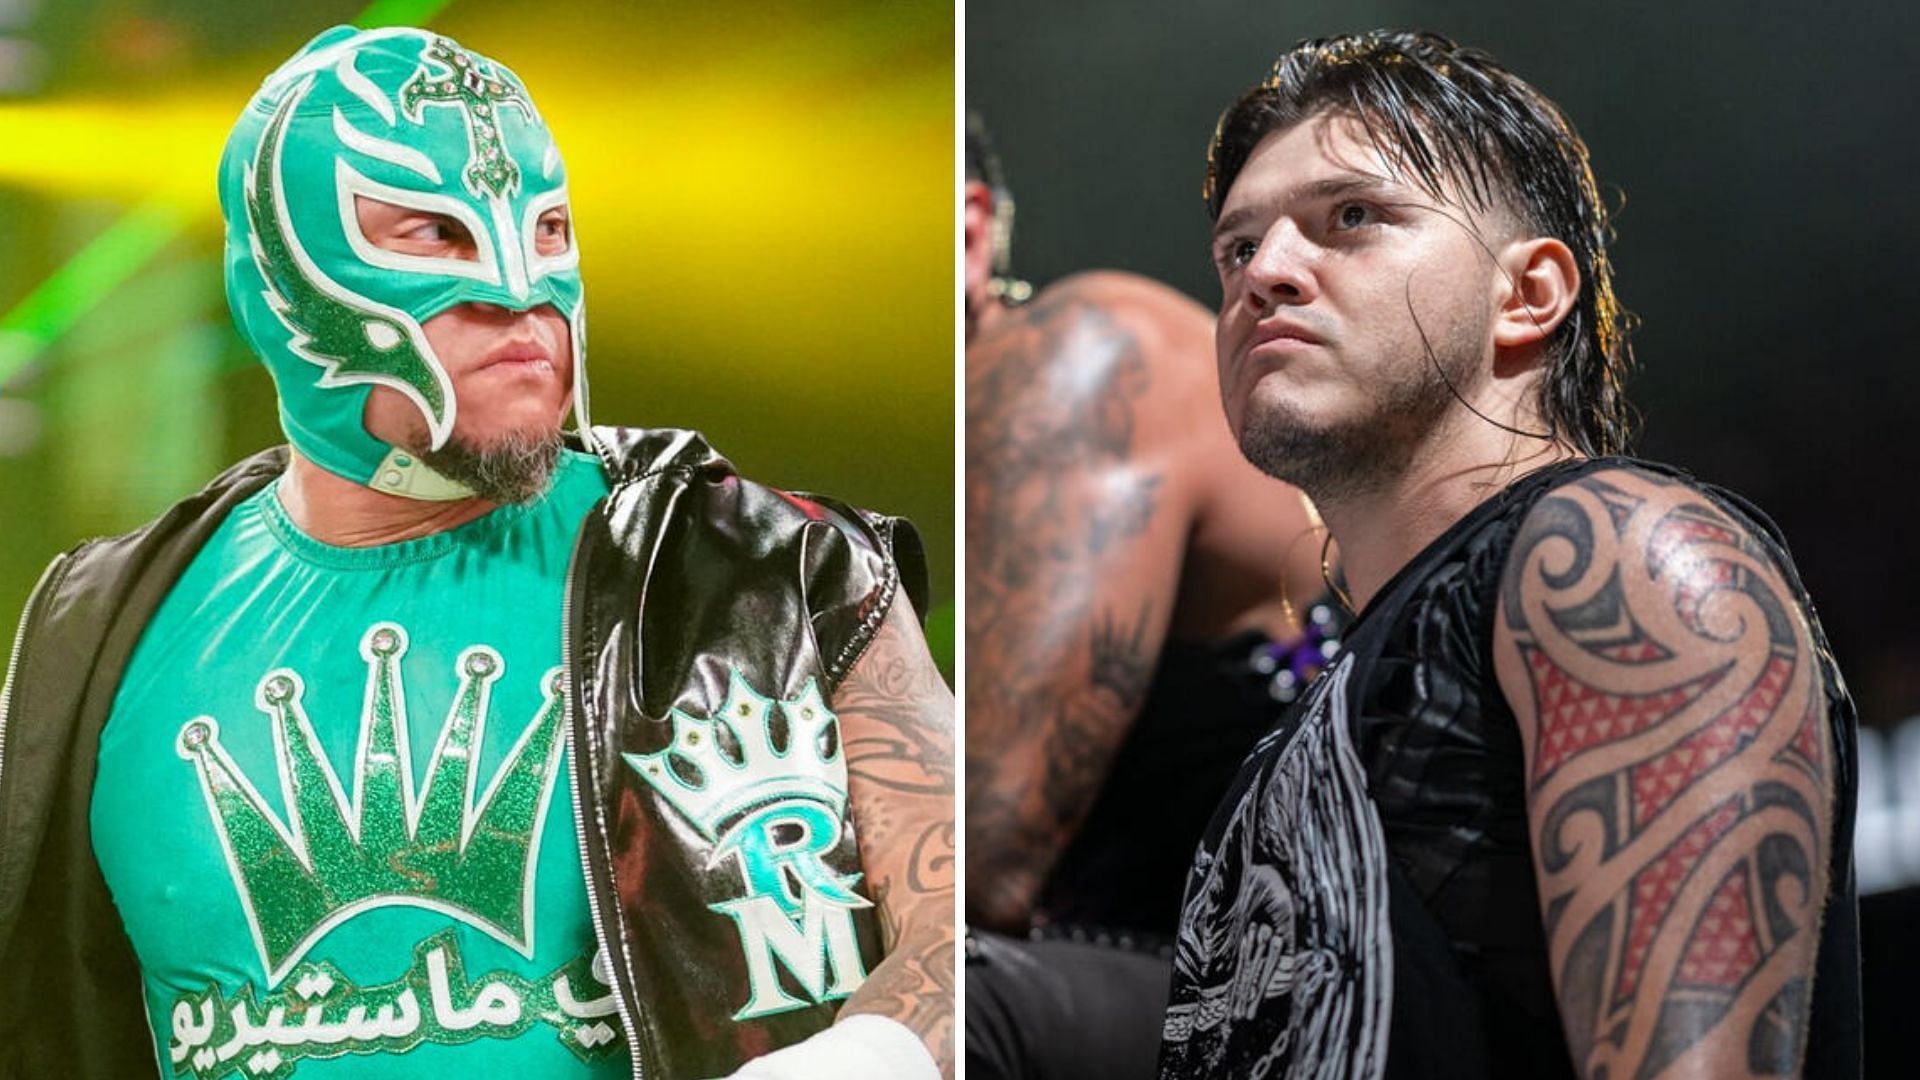 Rey Mysterio and Dominik Mysterio are not on good terms